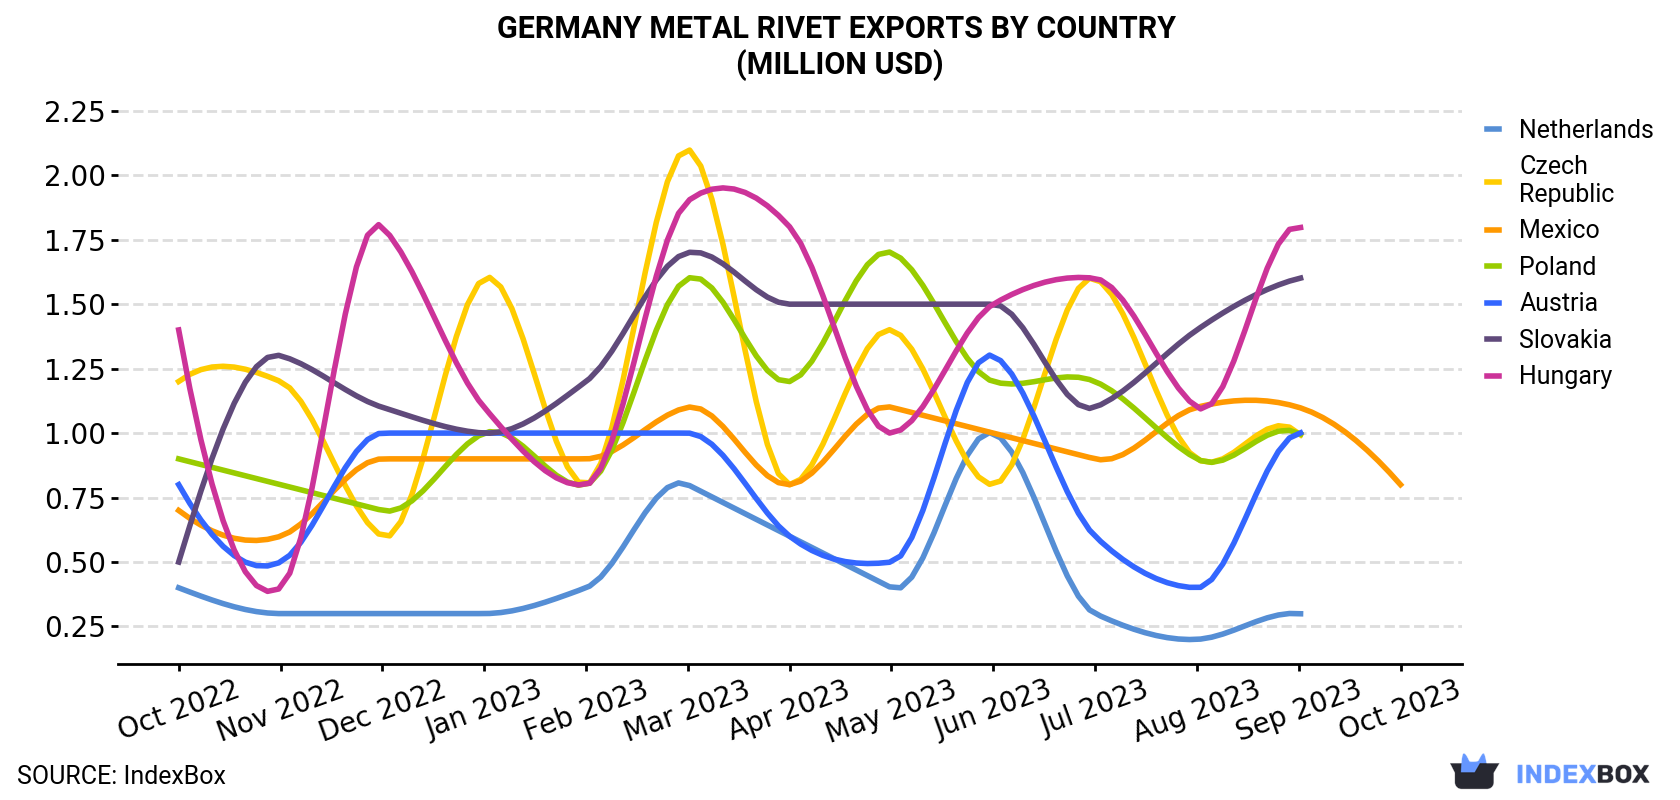 Germany Metal Rivet Exports By Country (Million USD)